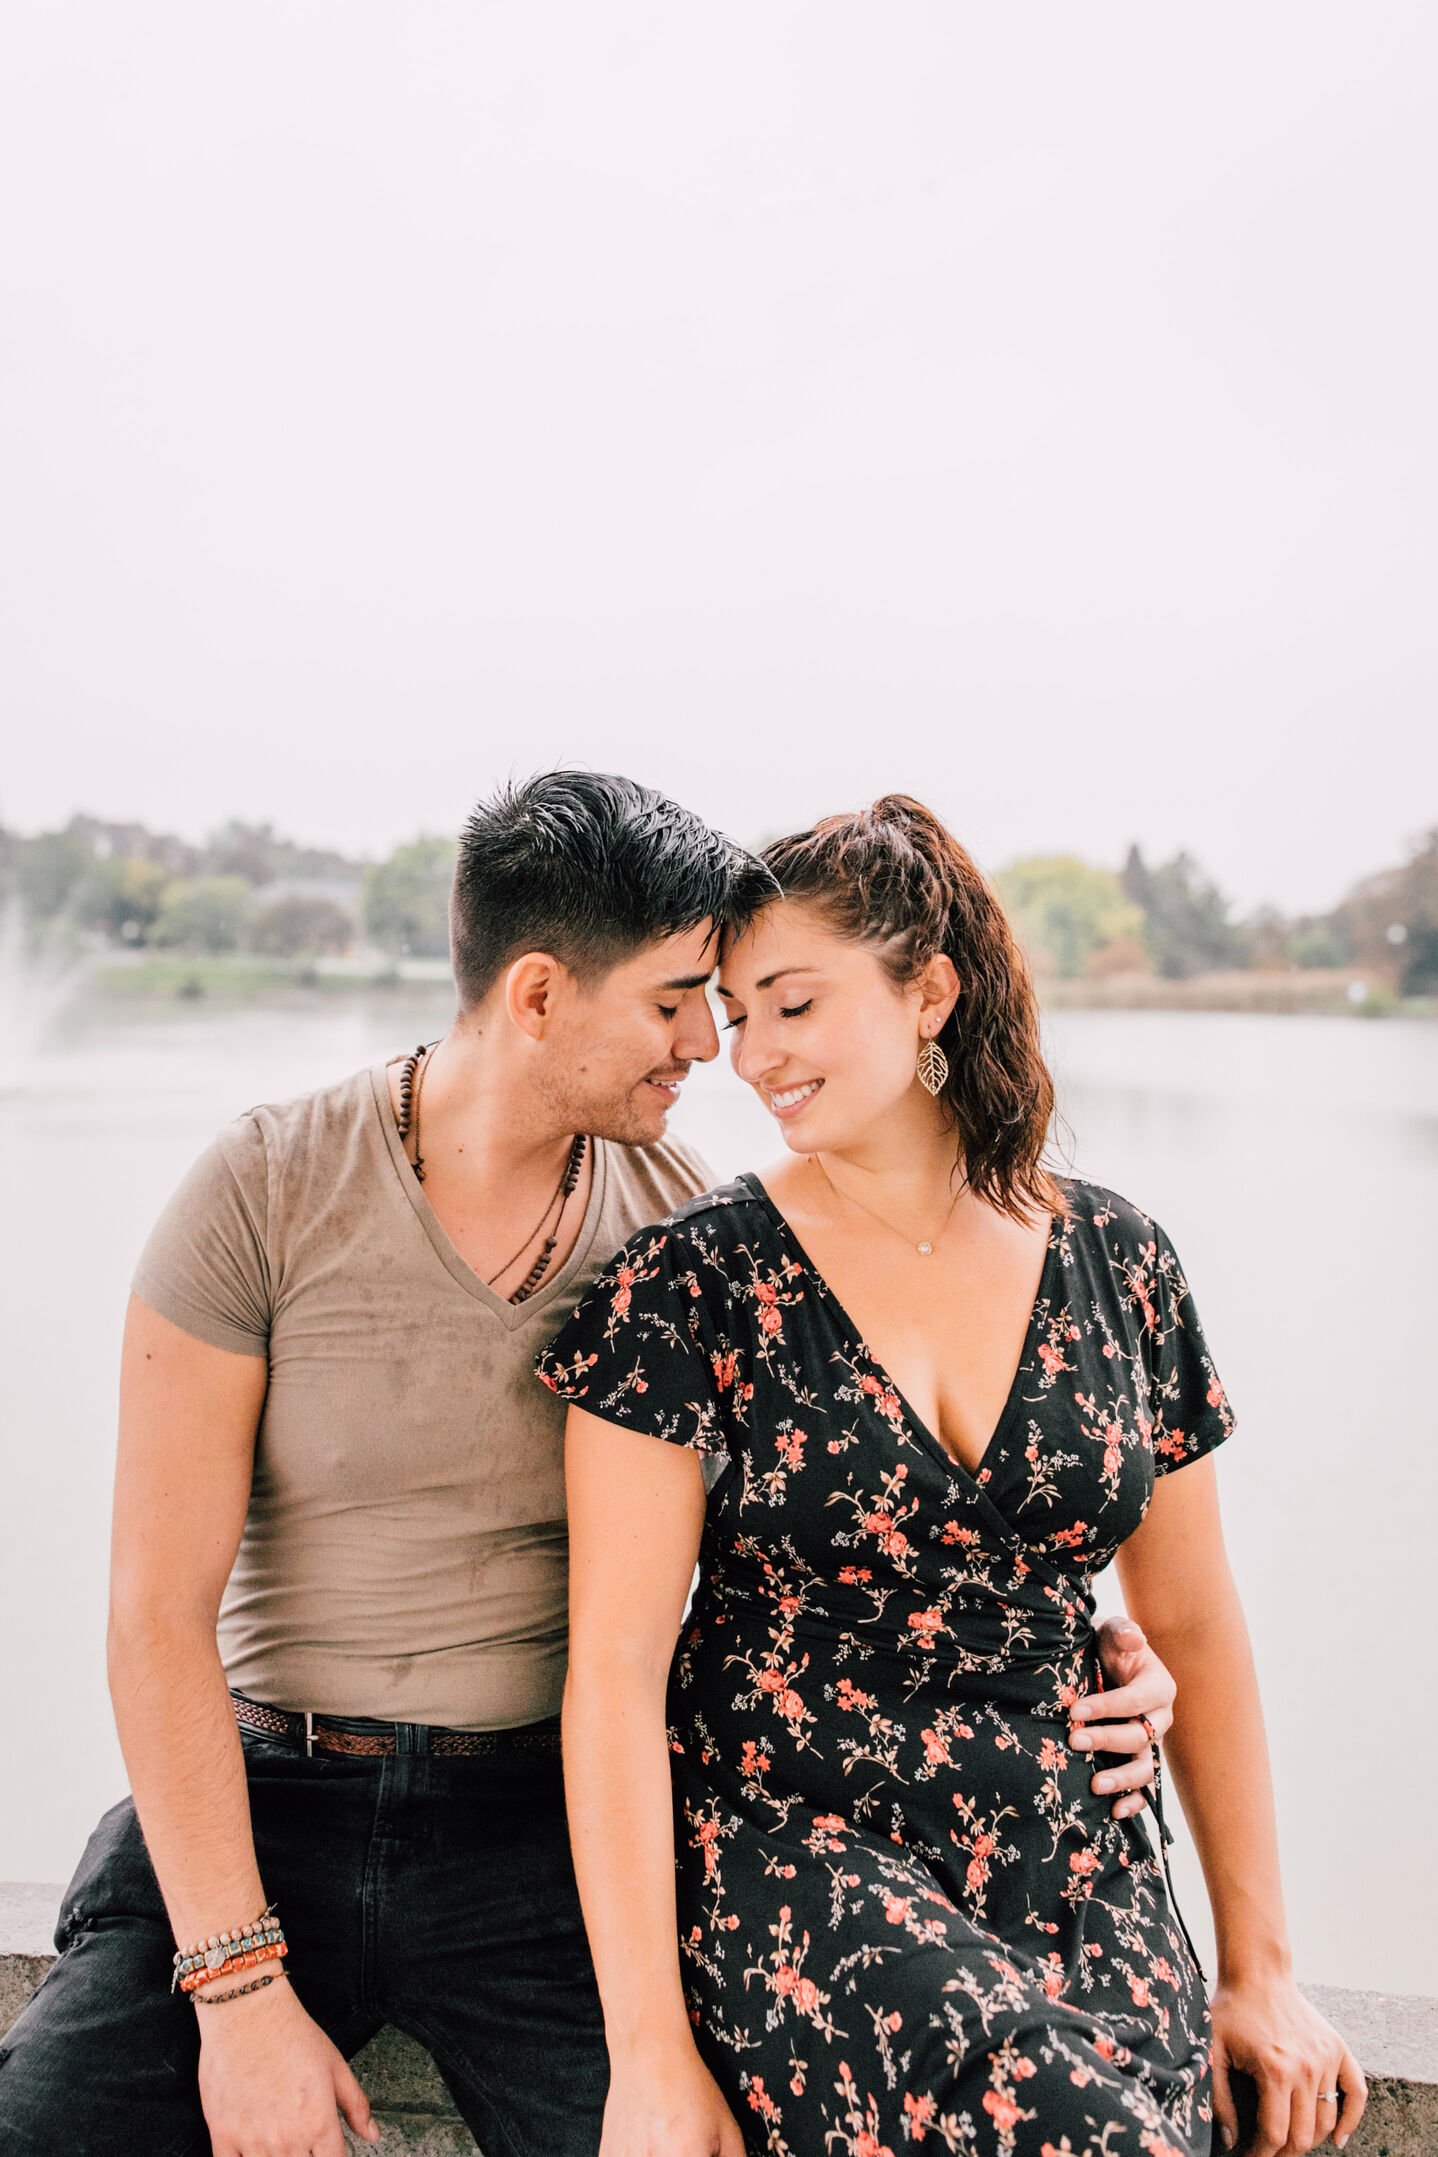  pablo and jessica lean into each other as they smile while sitting on the ledge of a gazebo in front of a lake during their engagement photos in the rain 